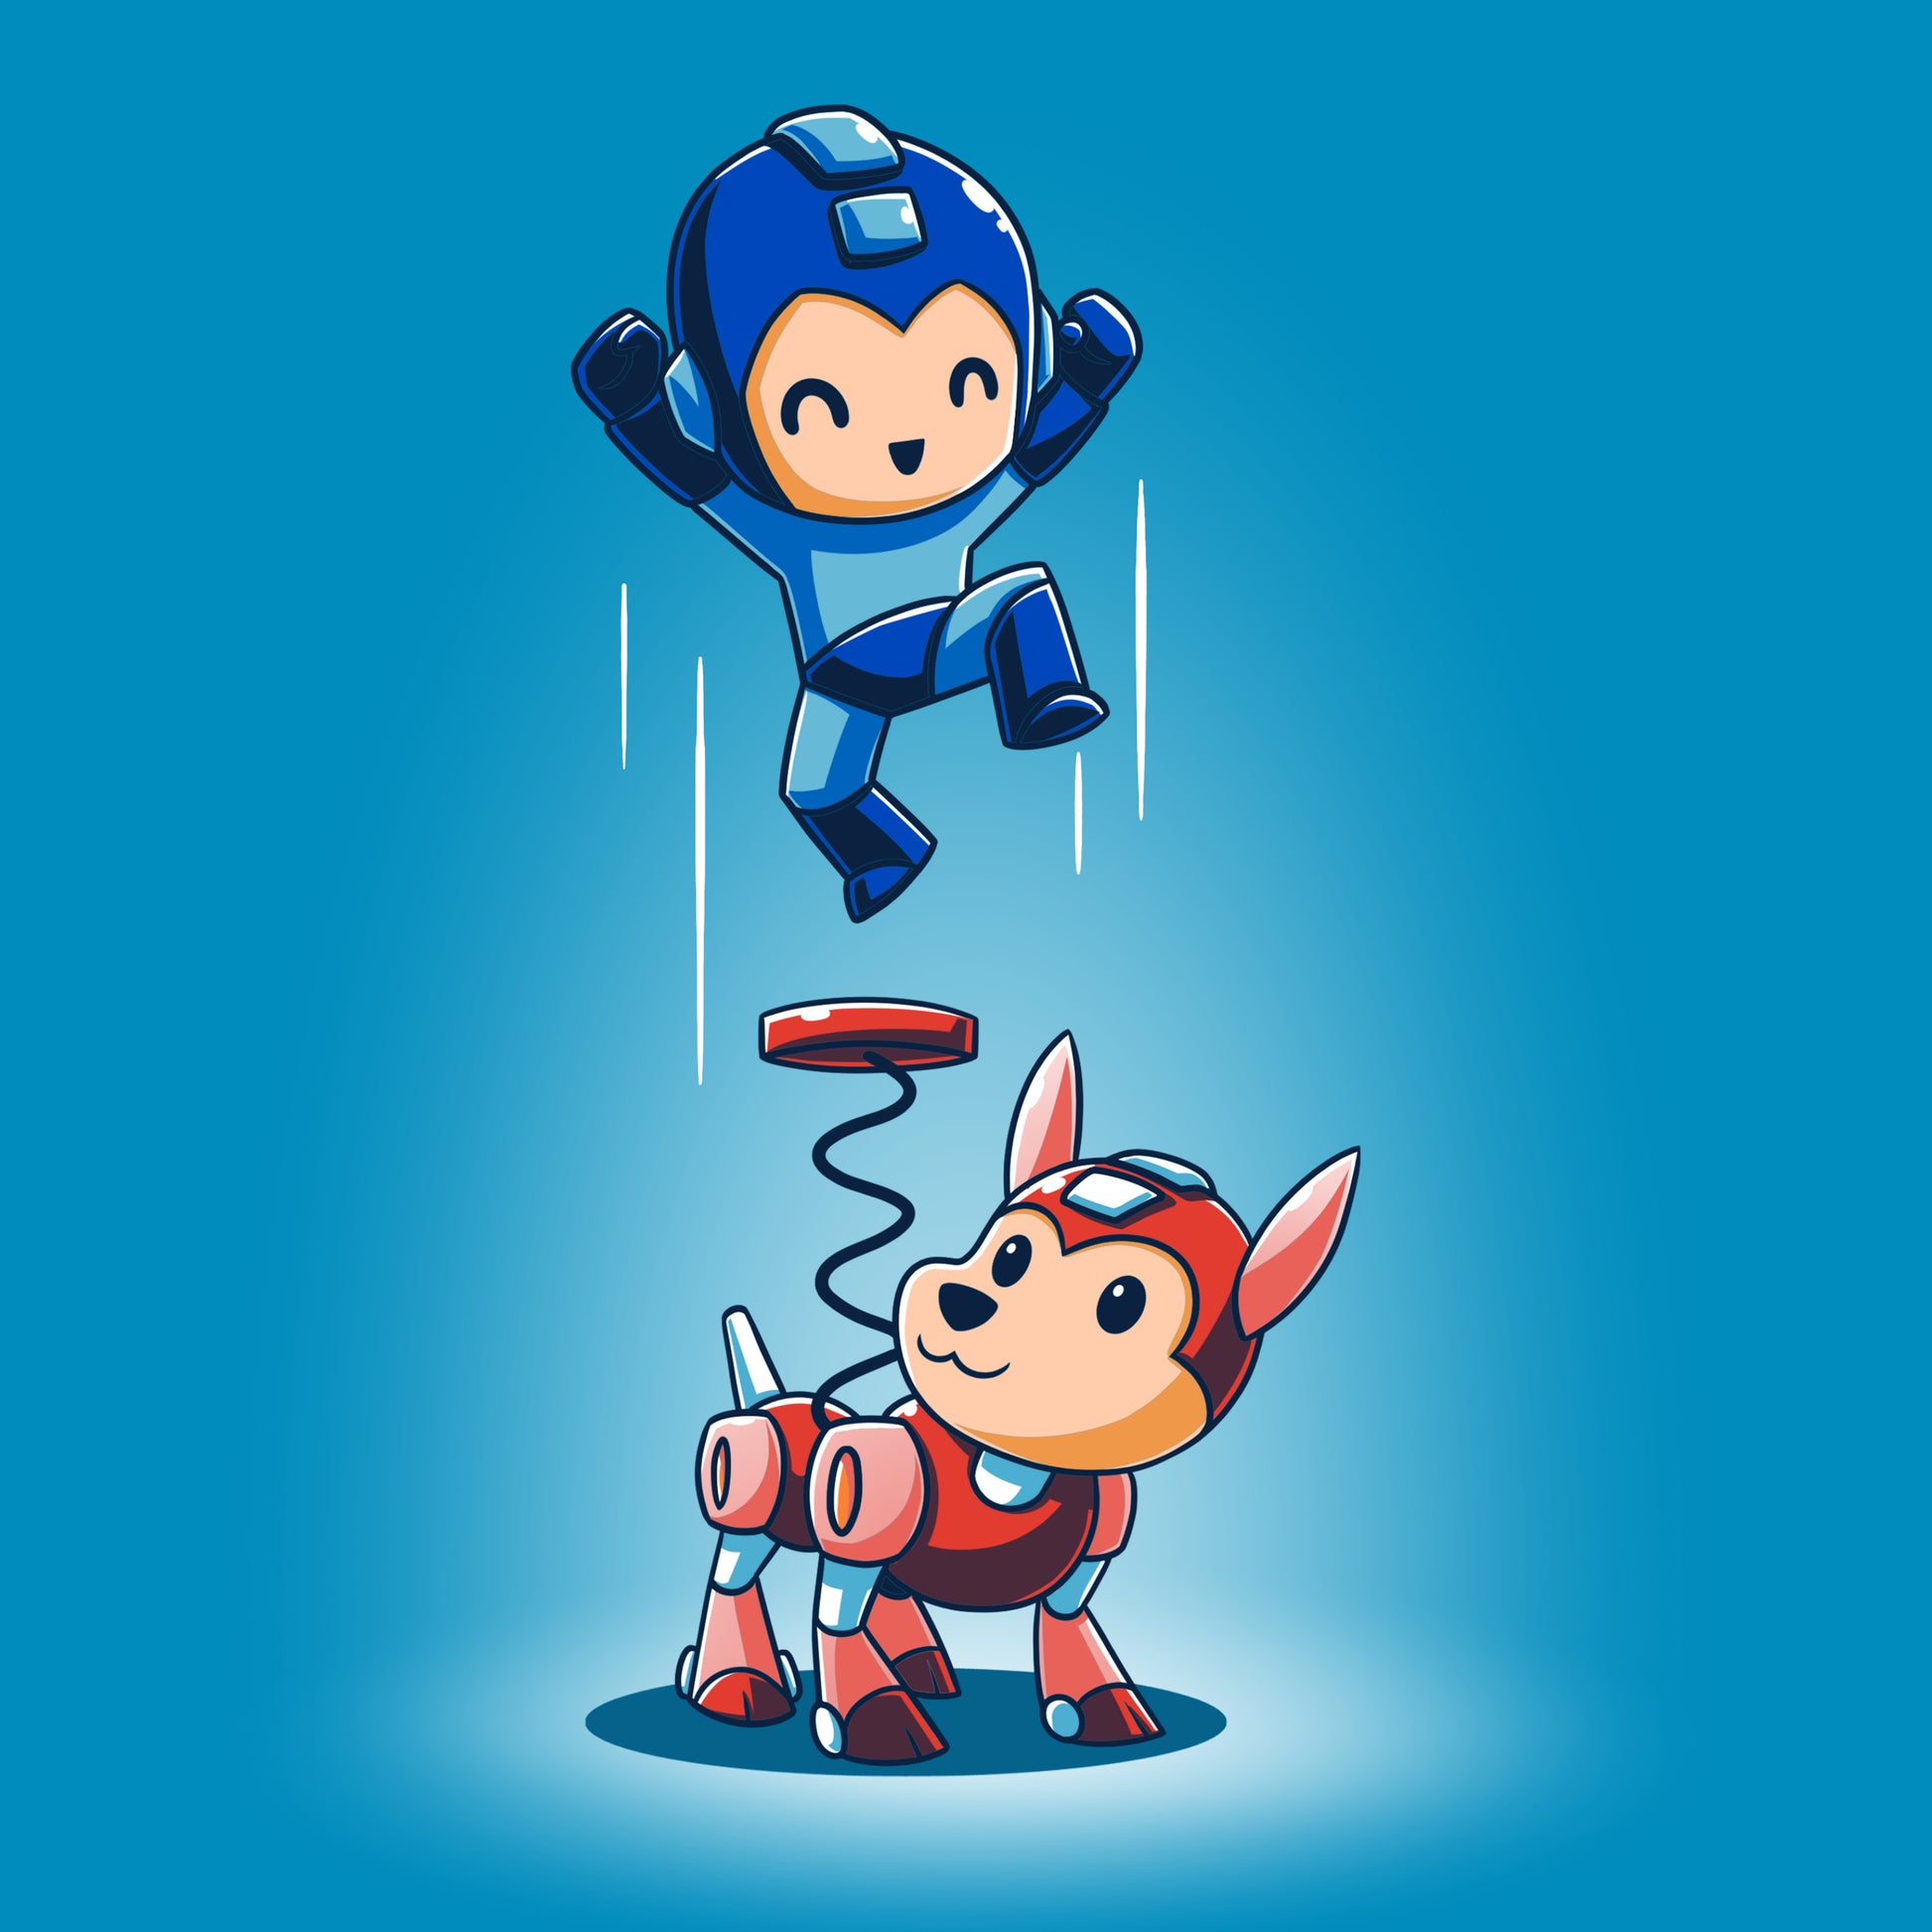 A Capcom Mega Man robot and a loyal dog named Rush Coil spring into action over a blue background.